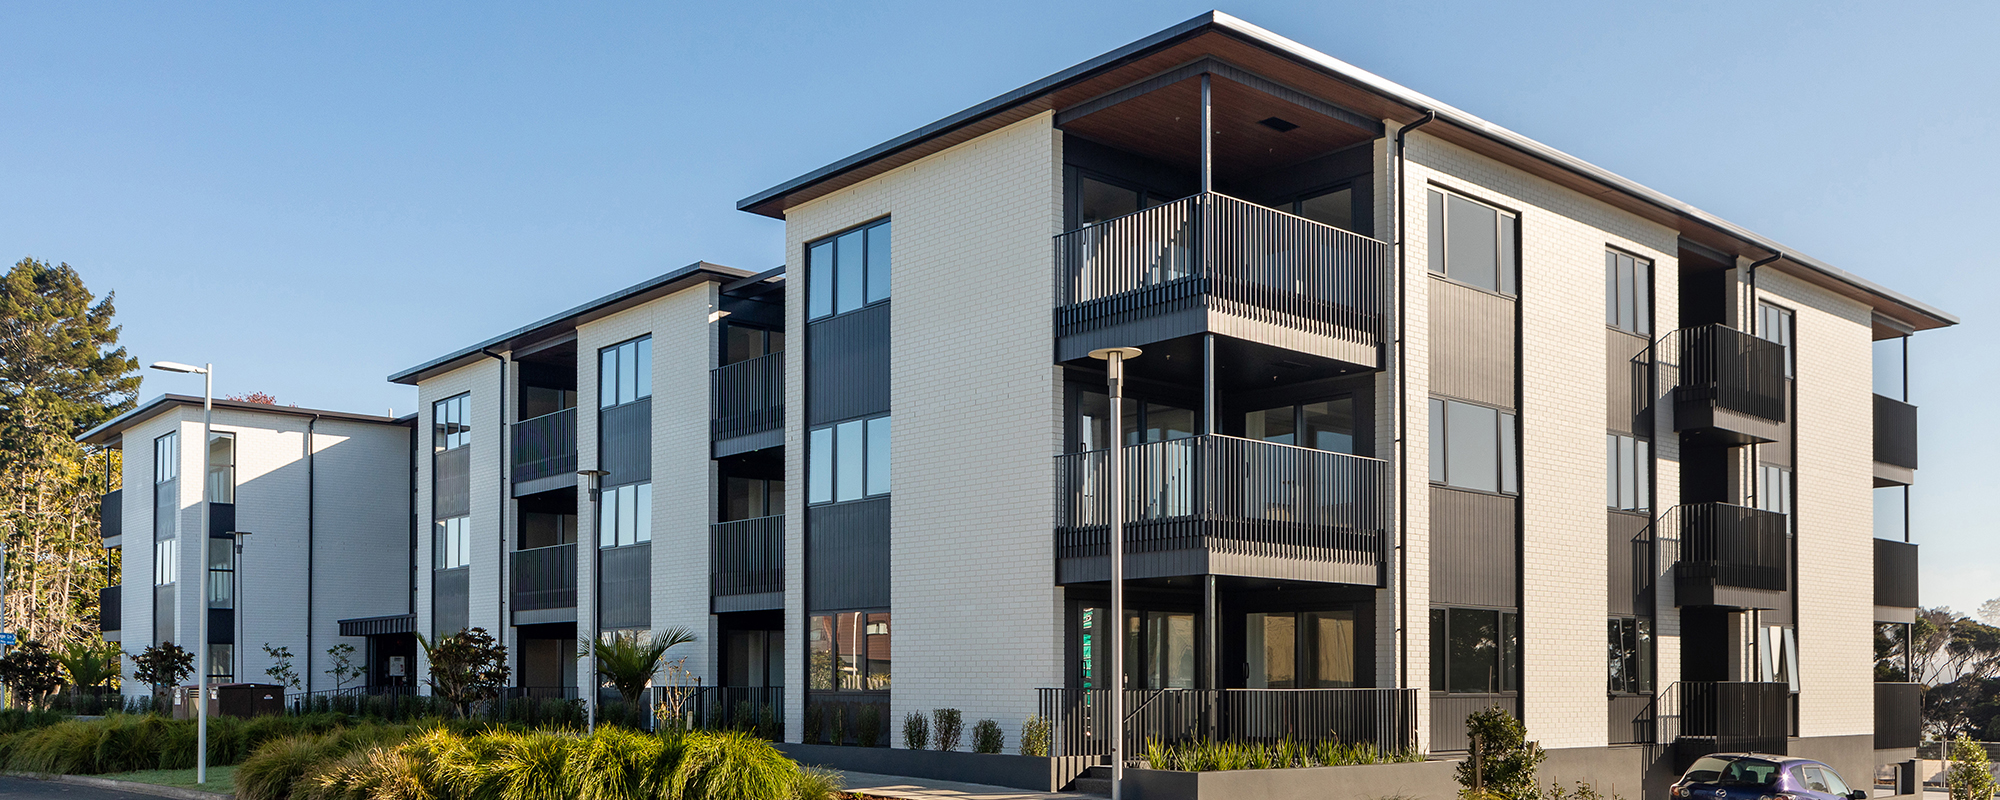 Edgewater – Achieving Affordability in Auckland